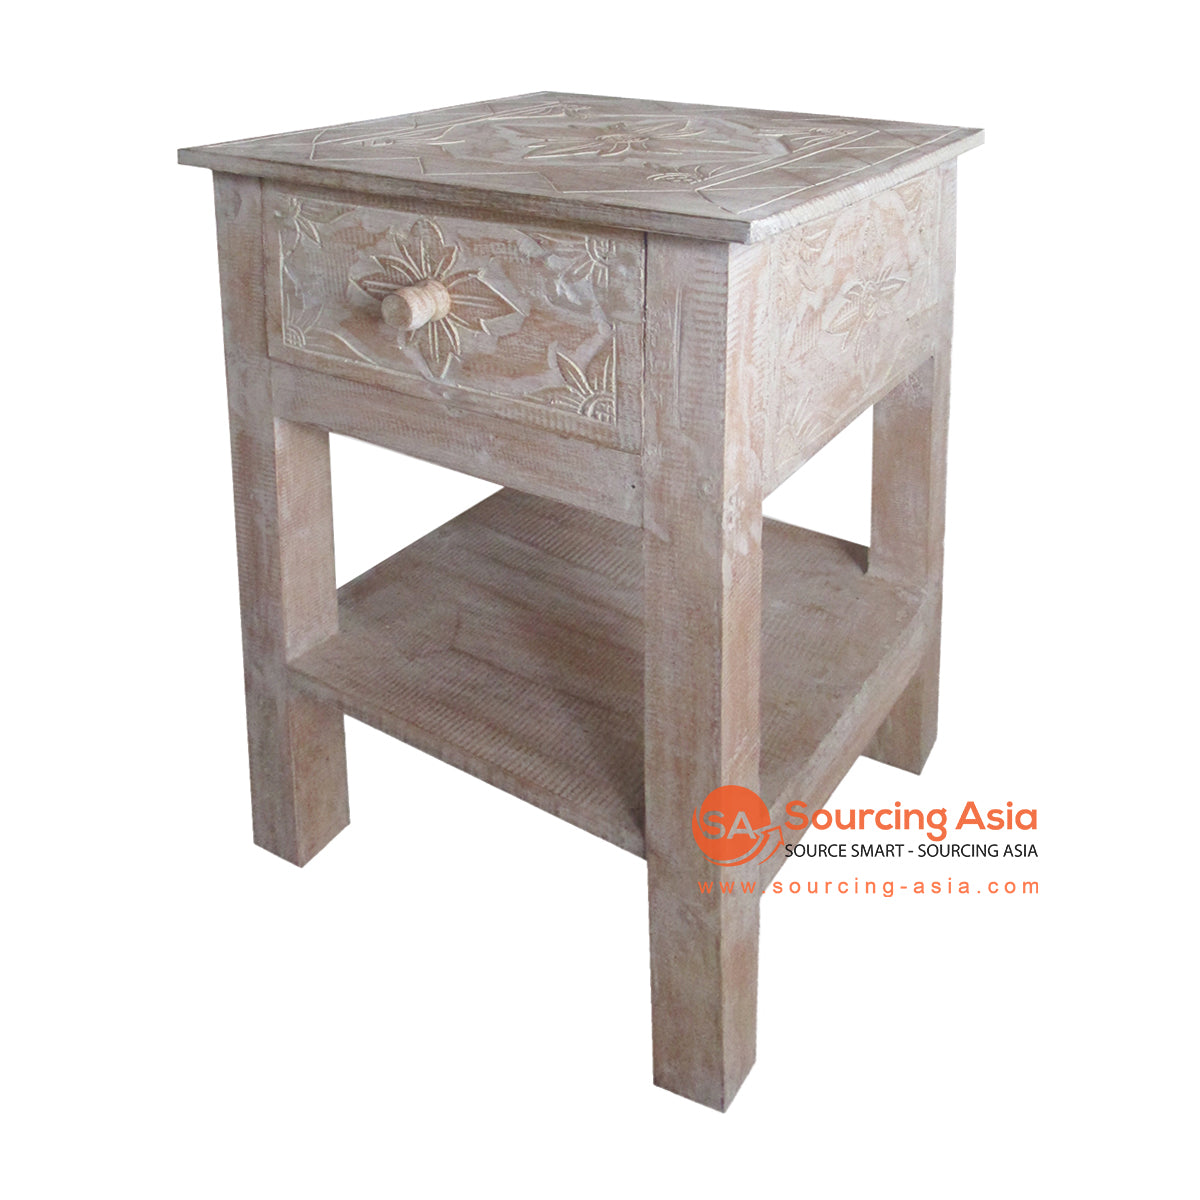 THE080-2 BROWN WASH WOODEN SIDE TABLE WITH DRAWER